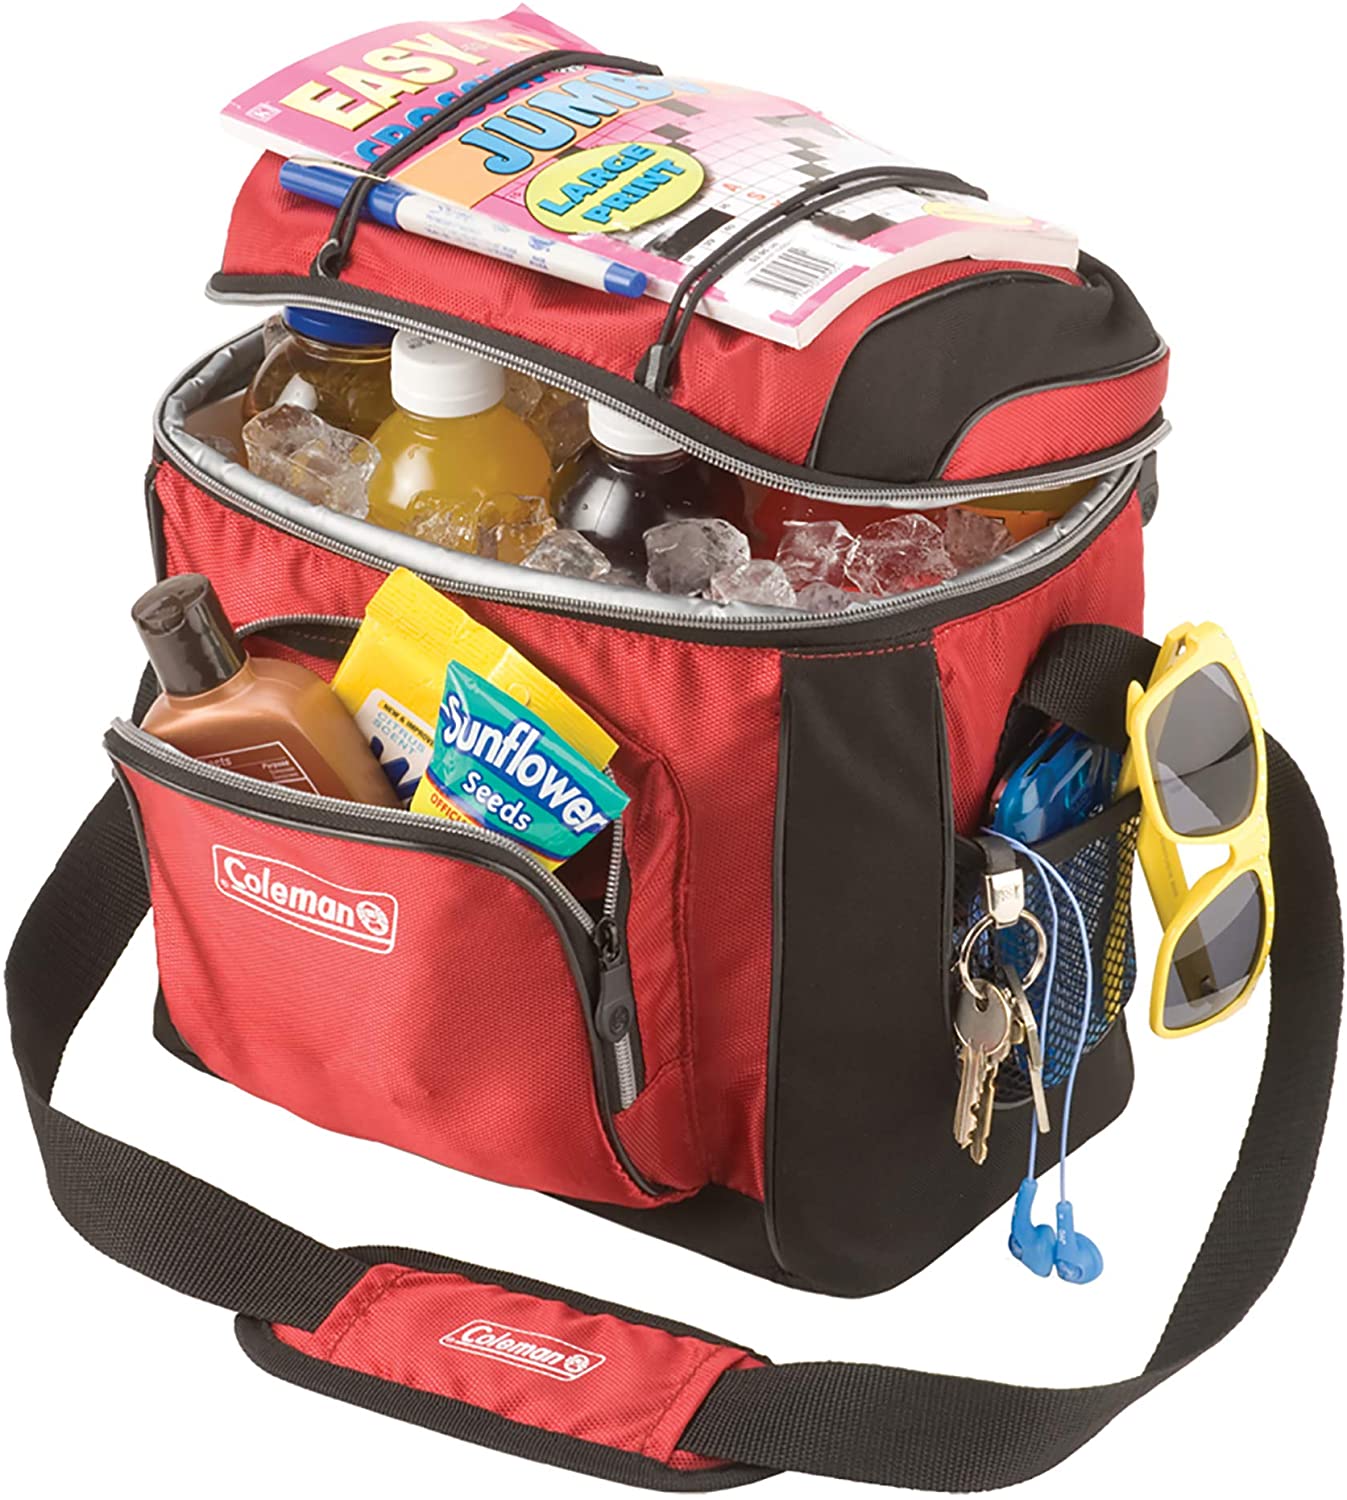 Coleman 9 Cans Soft-Sided Cooler, Red - image 5 of 5